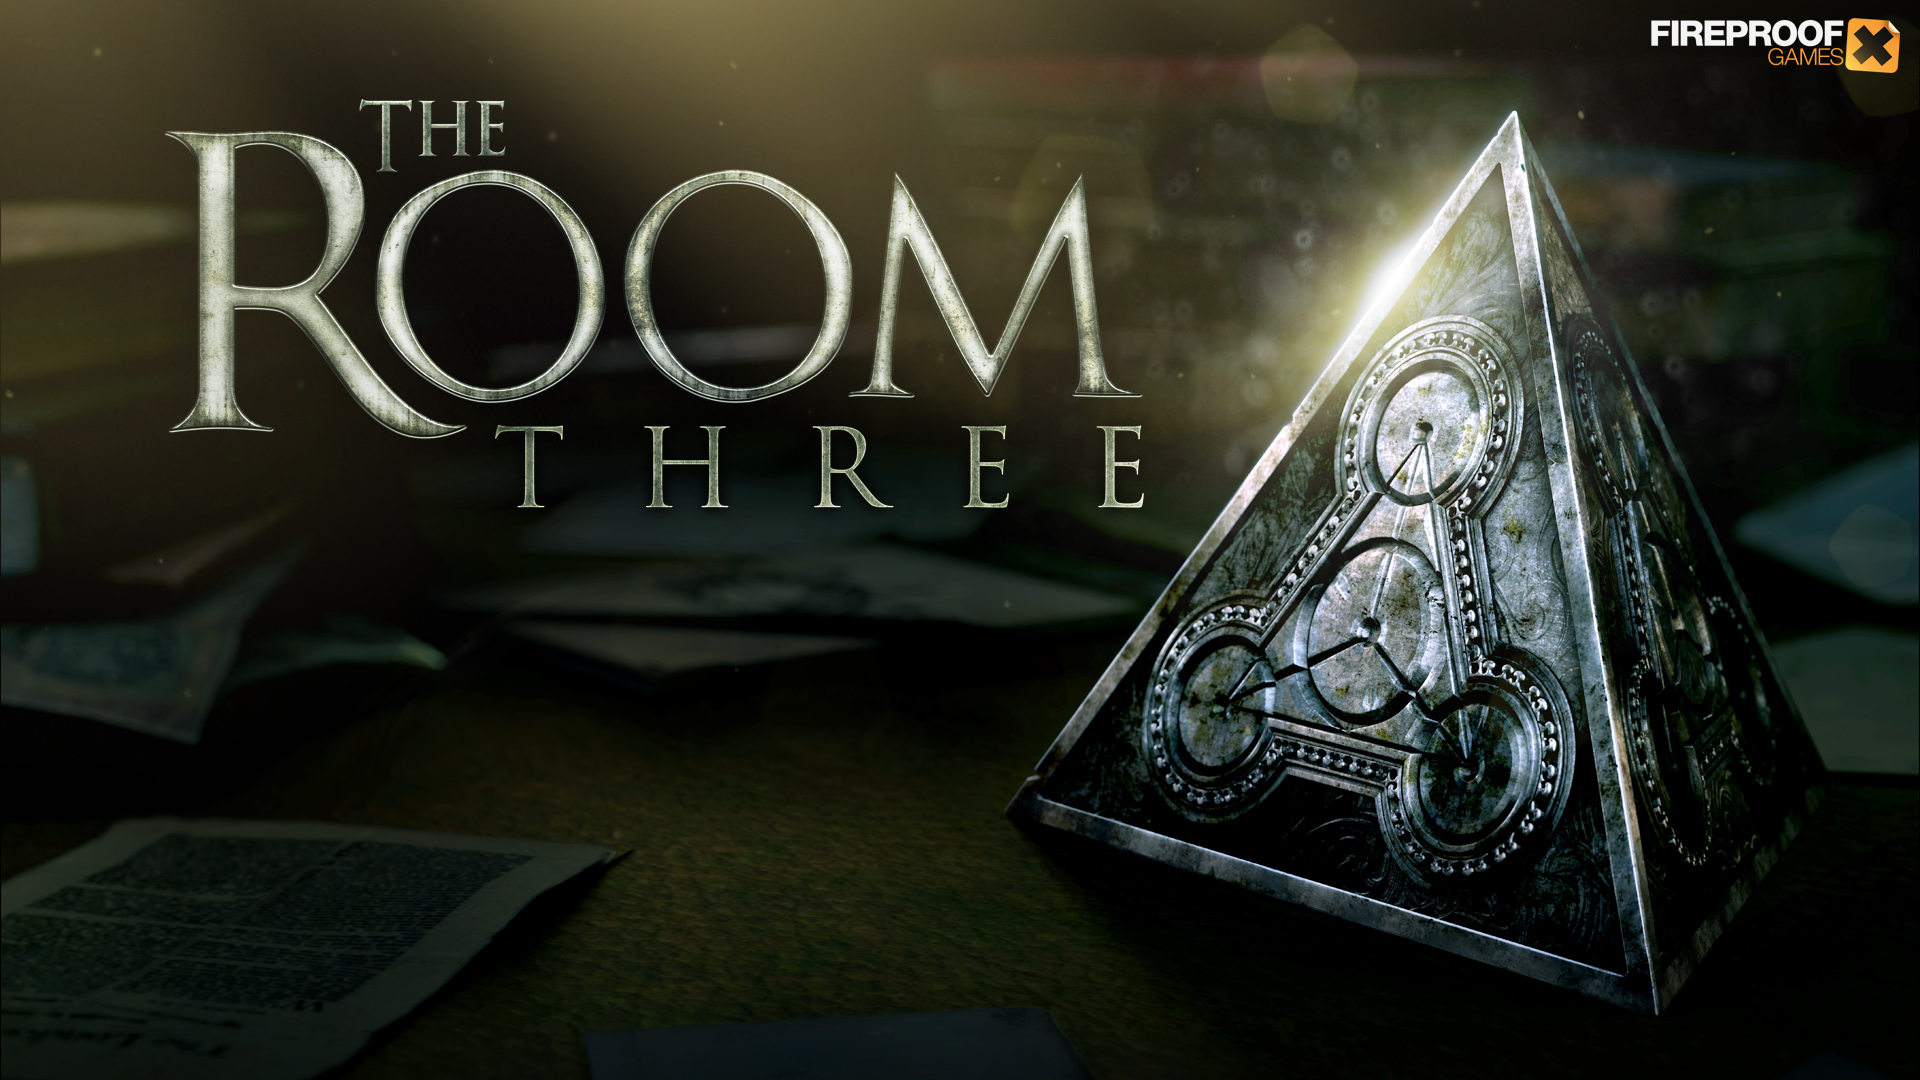 Room gameplay. The Room (игра). The Room three игра. The Room Fireproof games. Room головоломка.